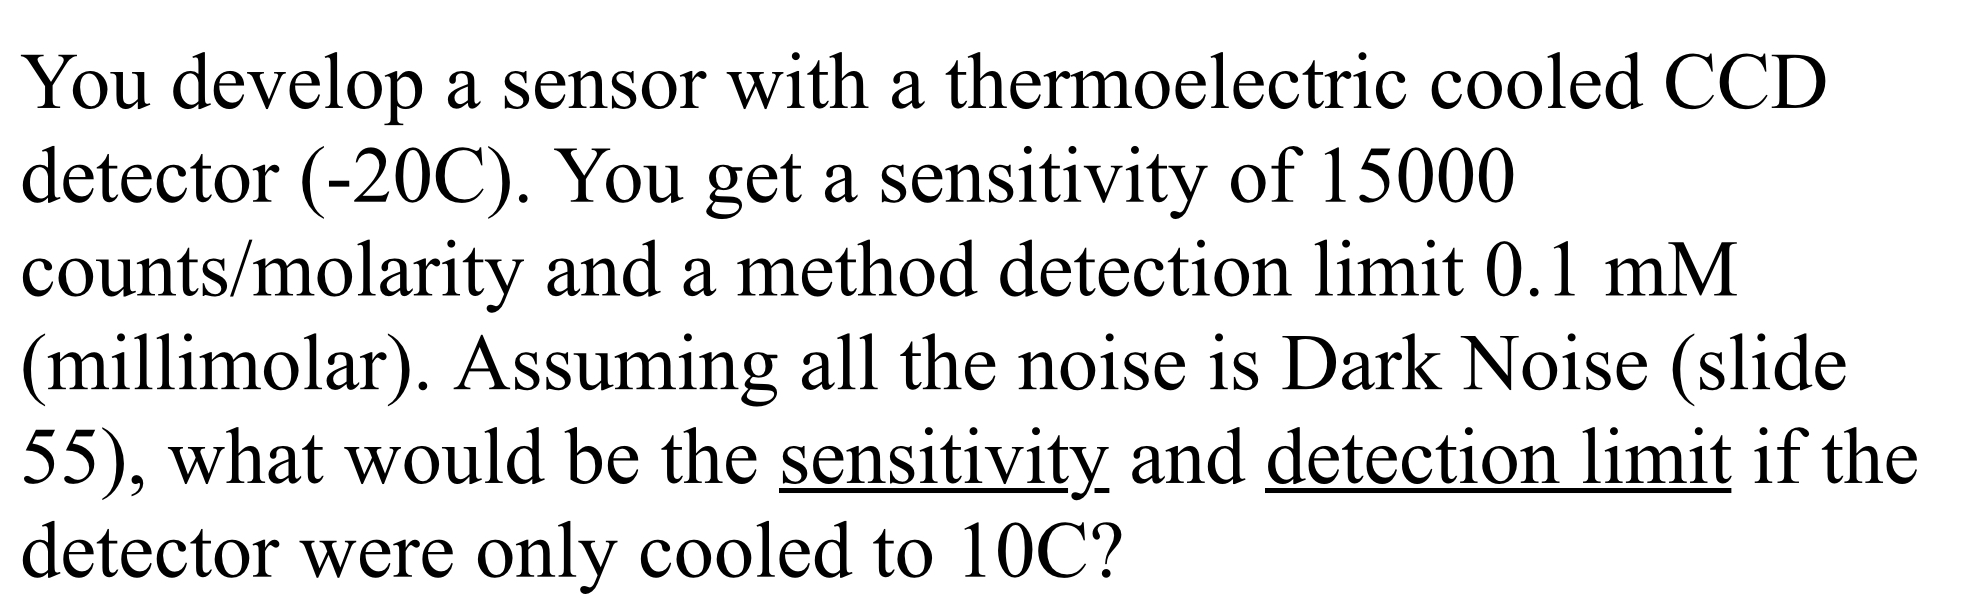 You develop a sensor with a thermoelectric cooled CCD
detector (-20C). You get a sensitivity of 15000
counts/molarity and a method detection limit 0.1 mM
(millimolar). Assuming all the noise is Dark Noise (slide
55), what would be the sensitivity and detection limit if the
detector were only cooled to 10C?
